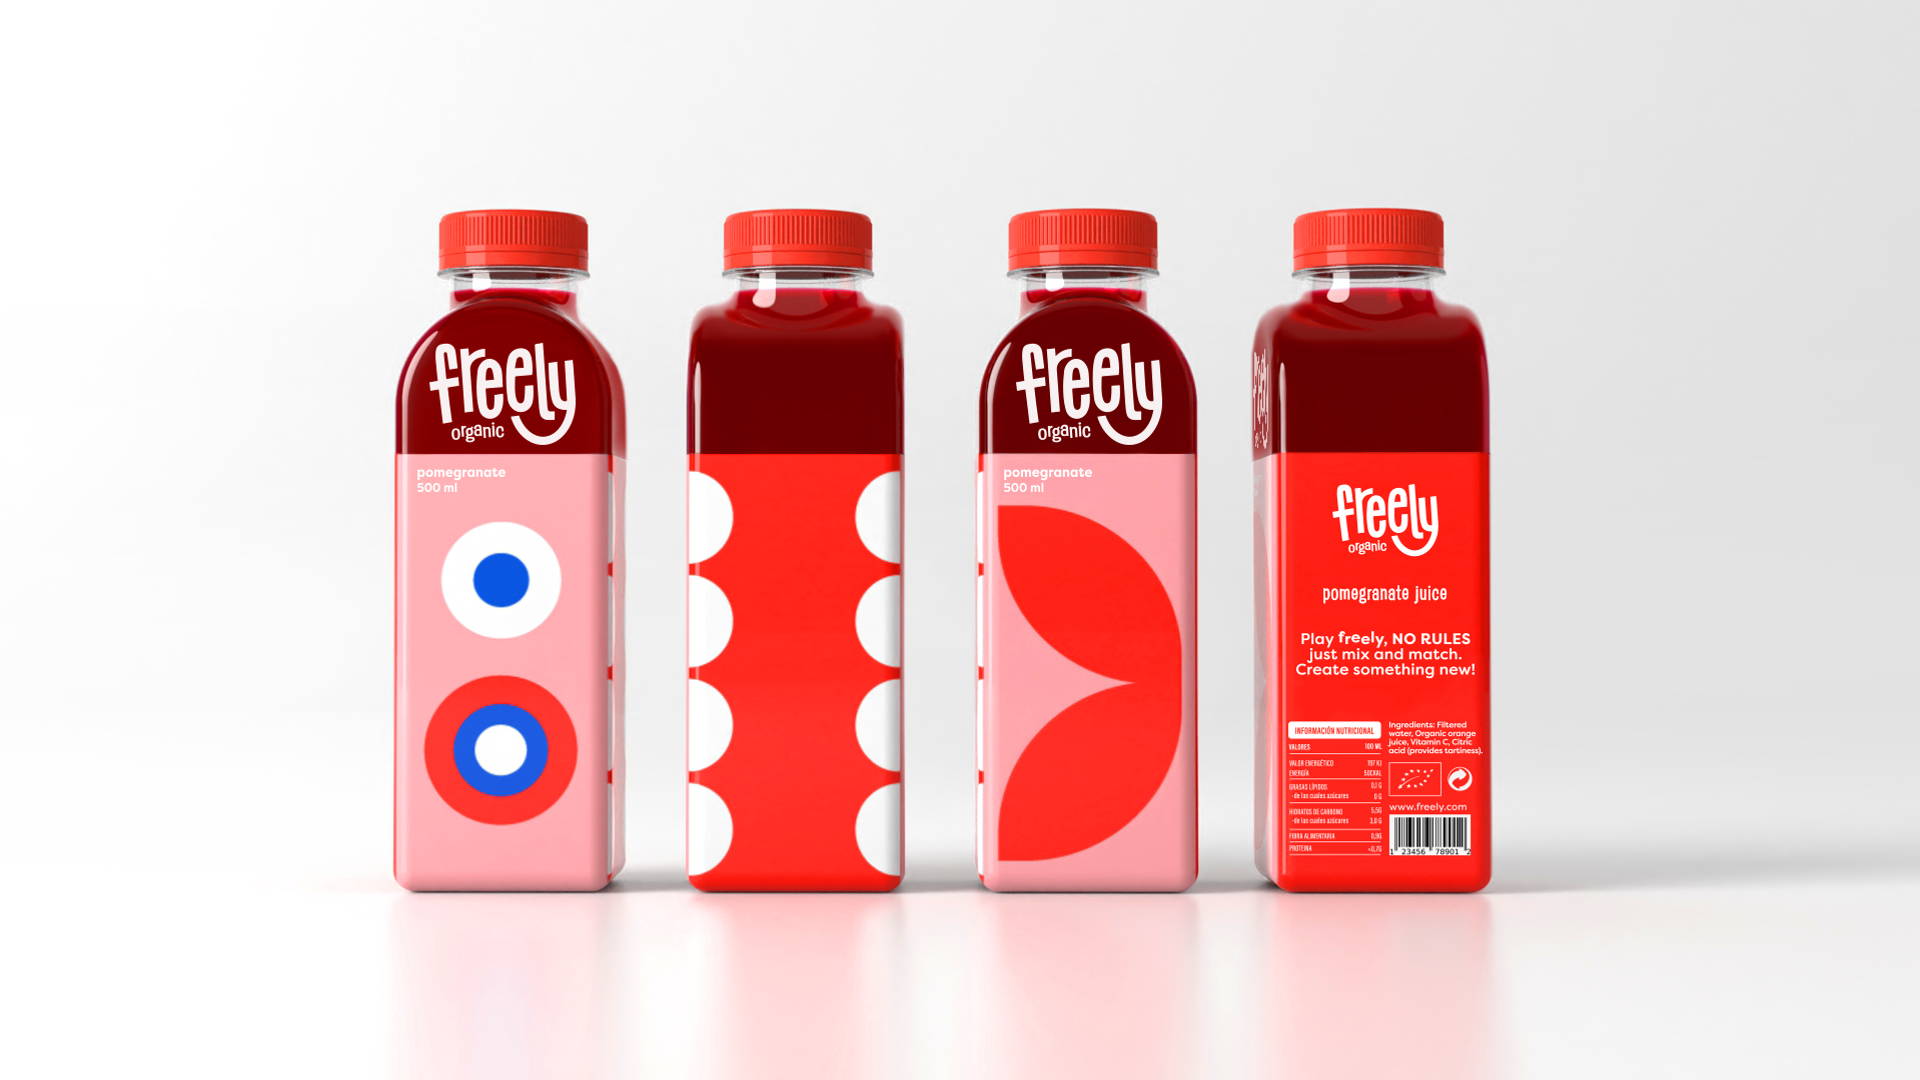 Featured image for Student Week: Freely Organic Juice's Innovative And Charming Design